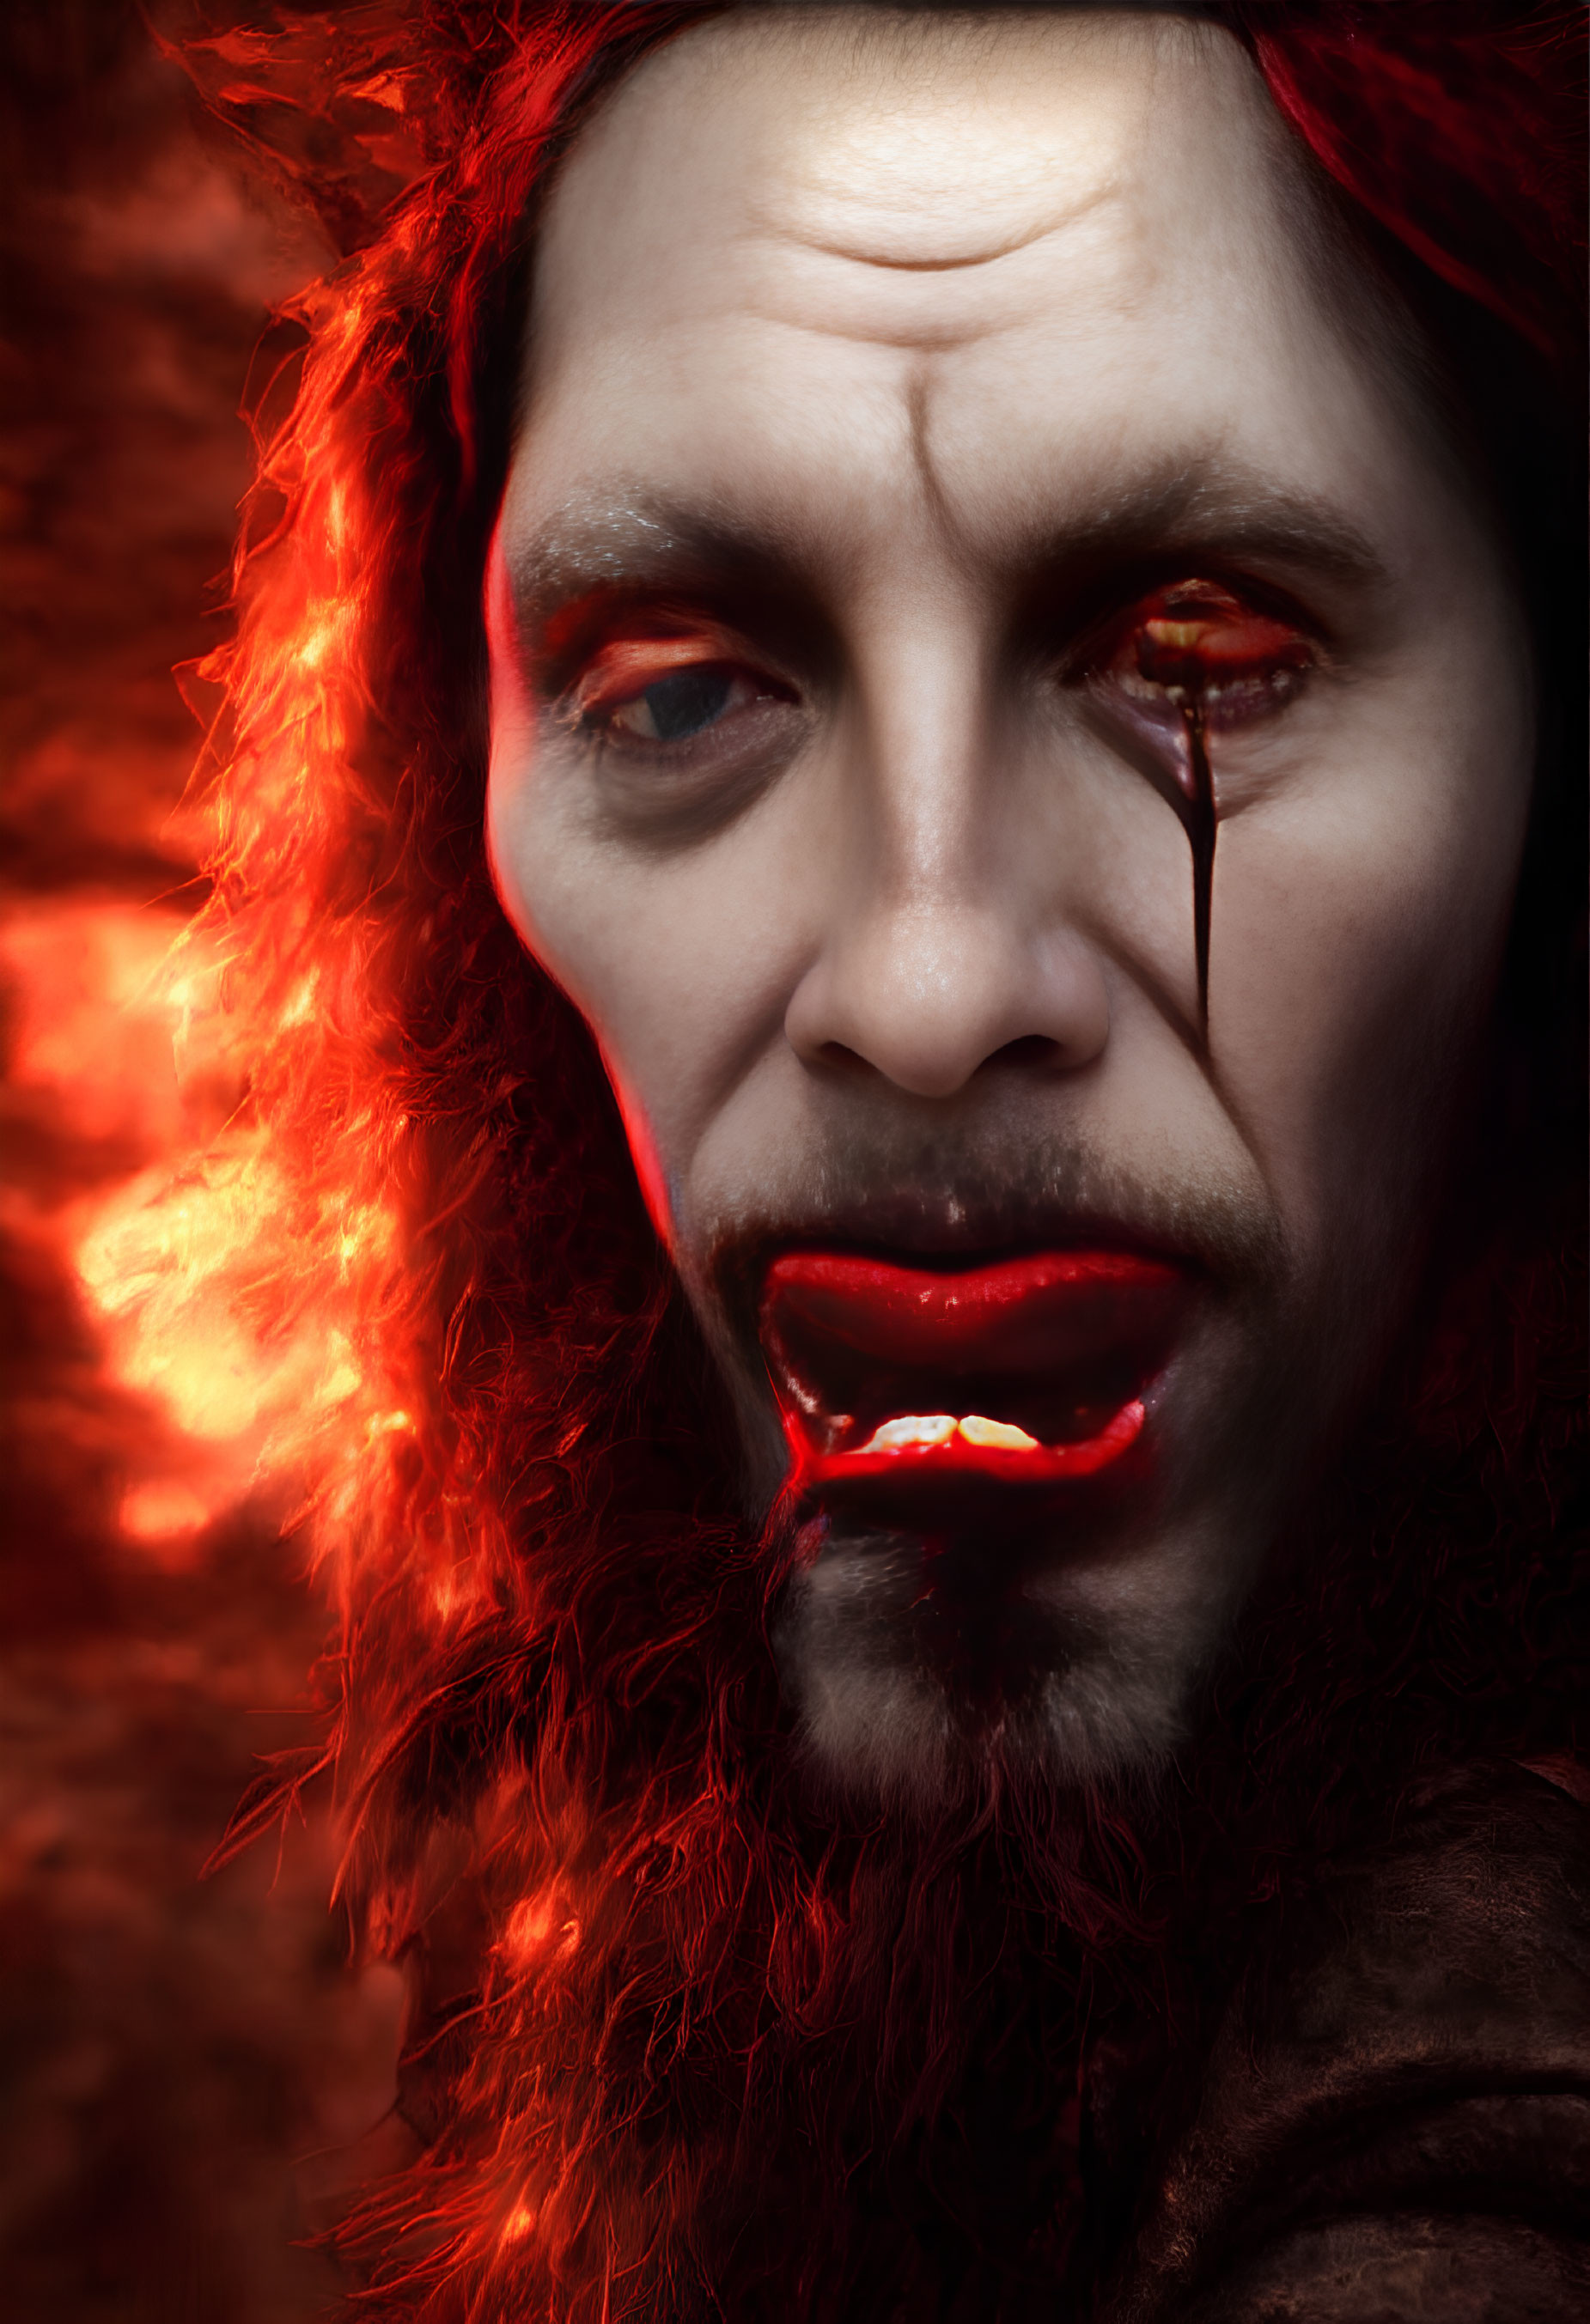 Sinister figure with red eyes, vampire fangs, and blood, against fiery background